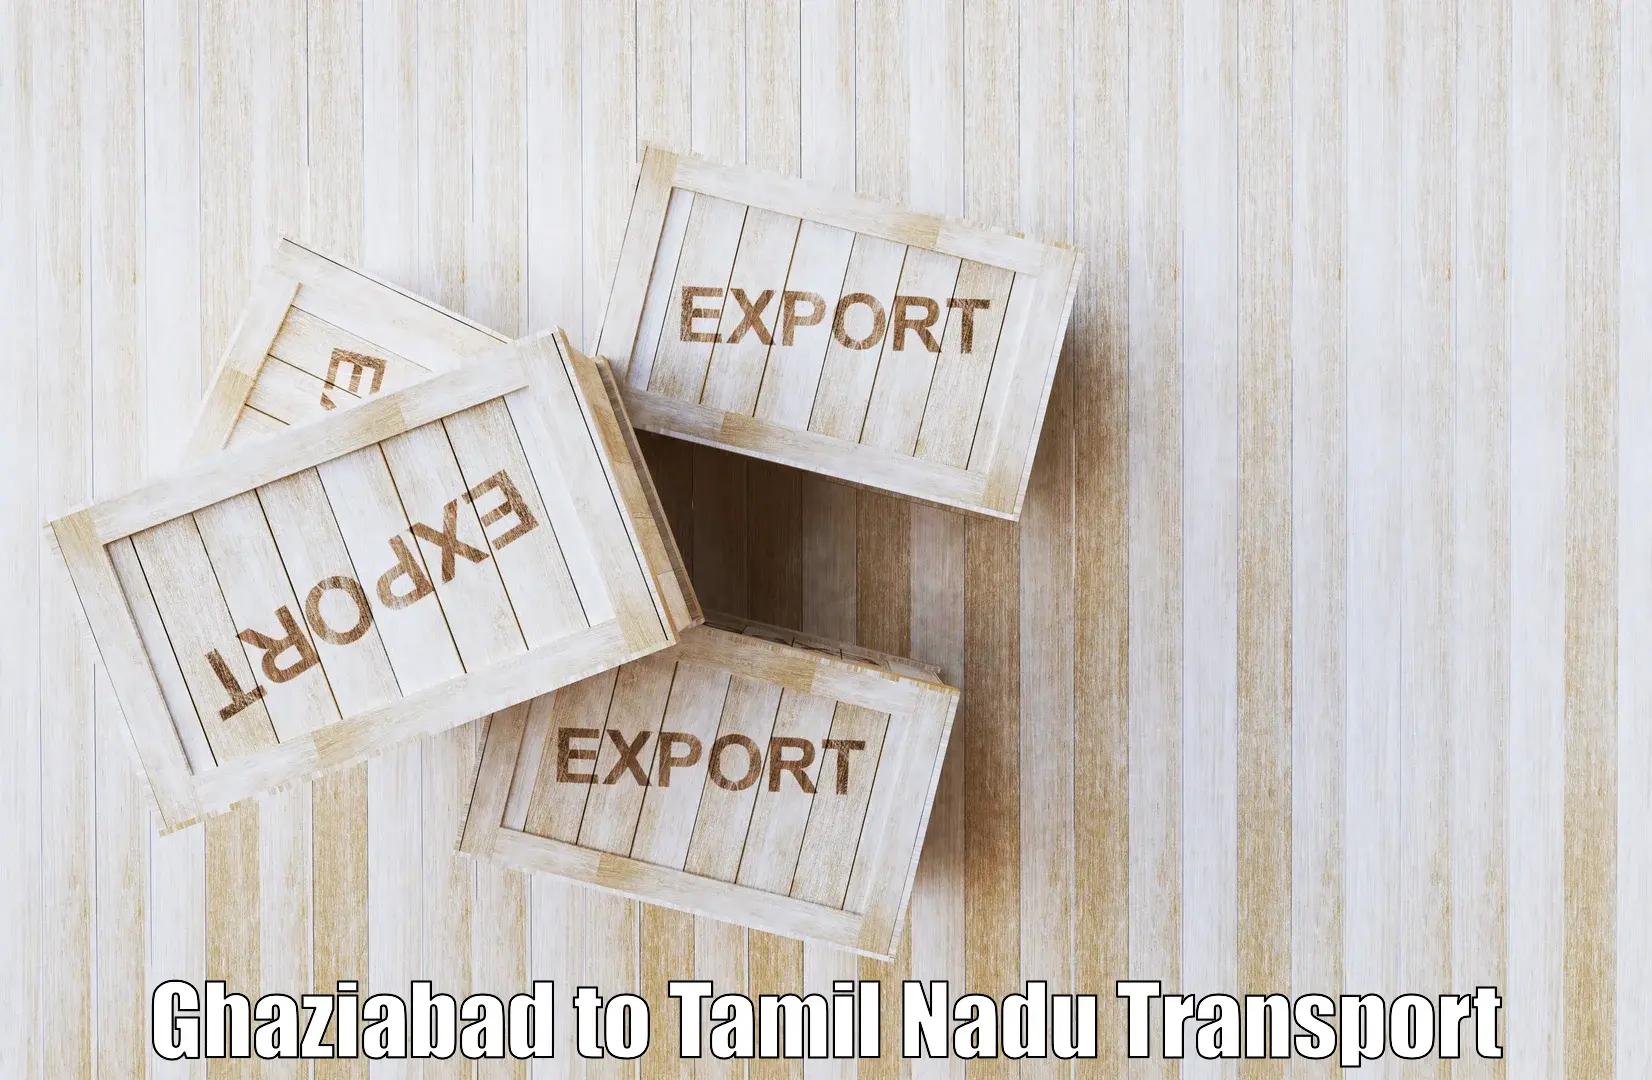 Express transport services Ghaziabad to Chennai Port